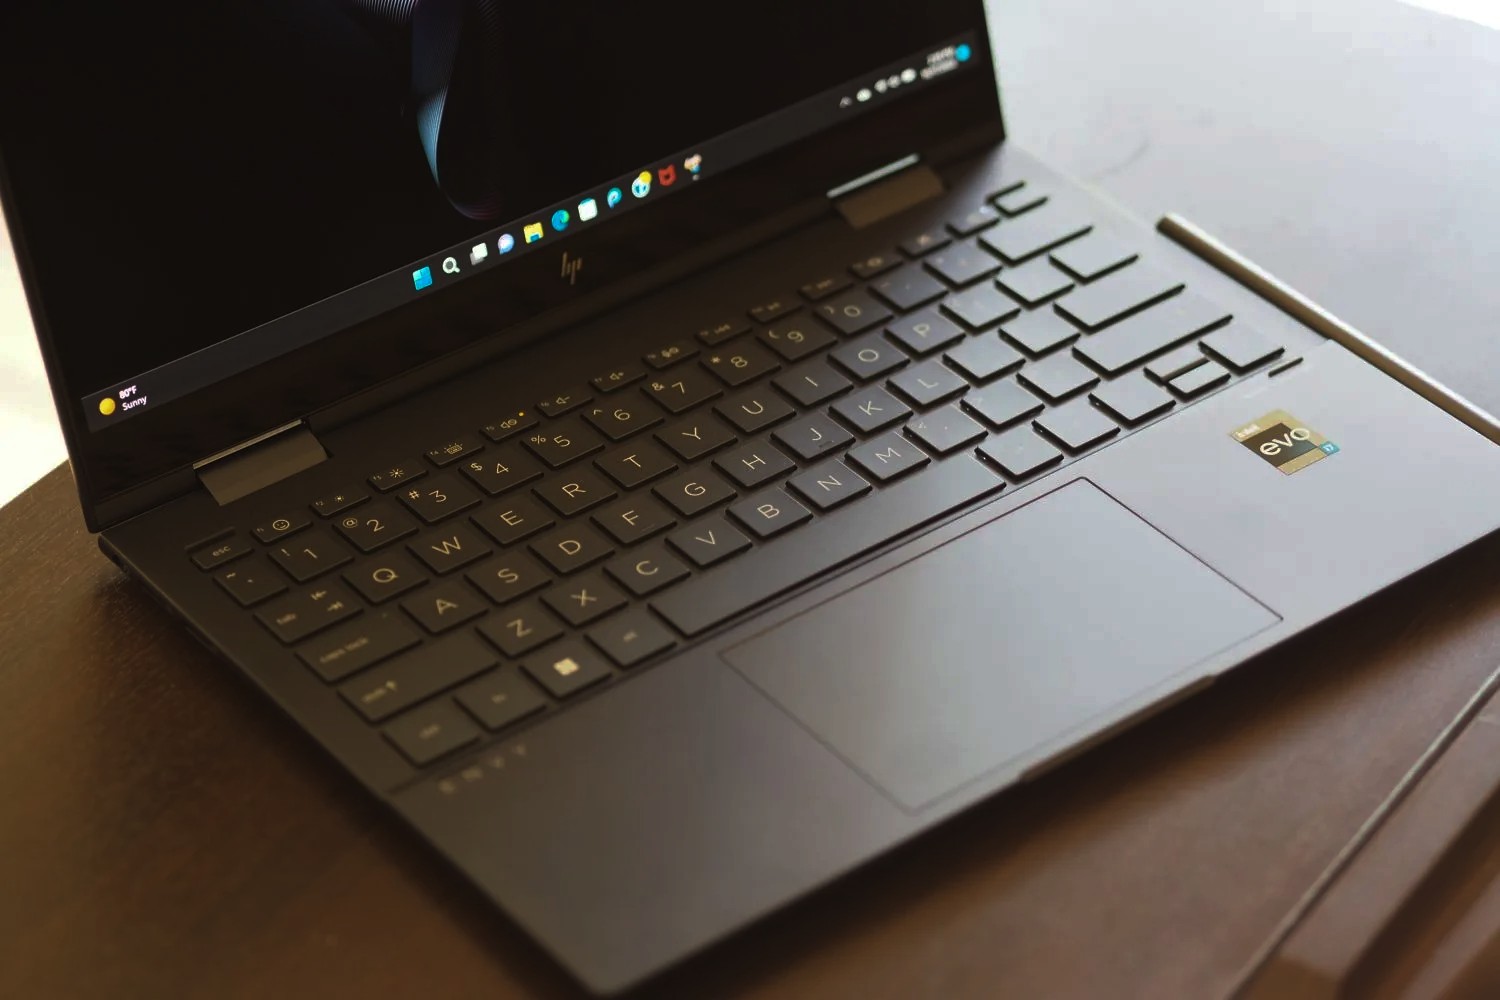 HP Envy x360 13 Review: Midrange 2-in-1 That's Short on Battery - CNET